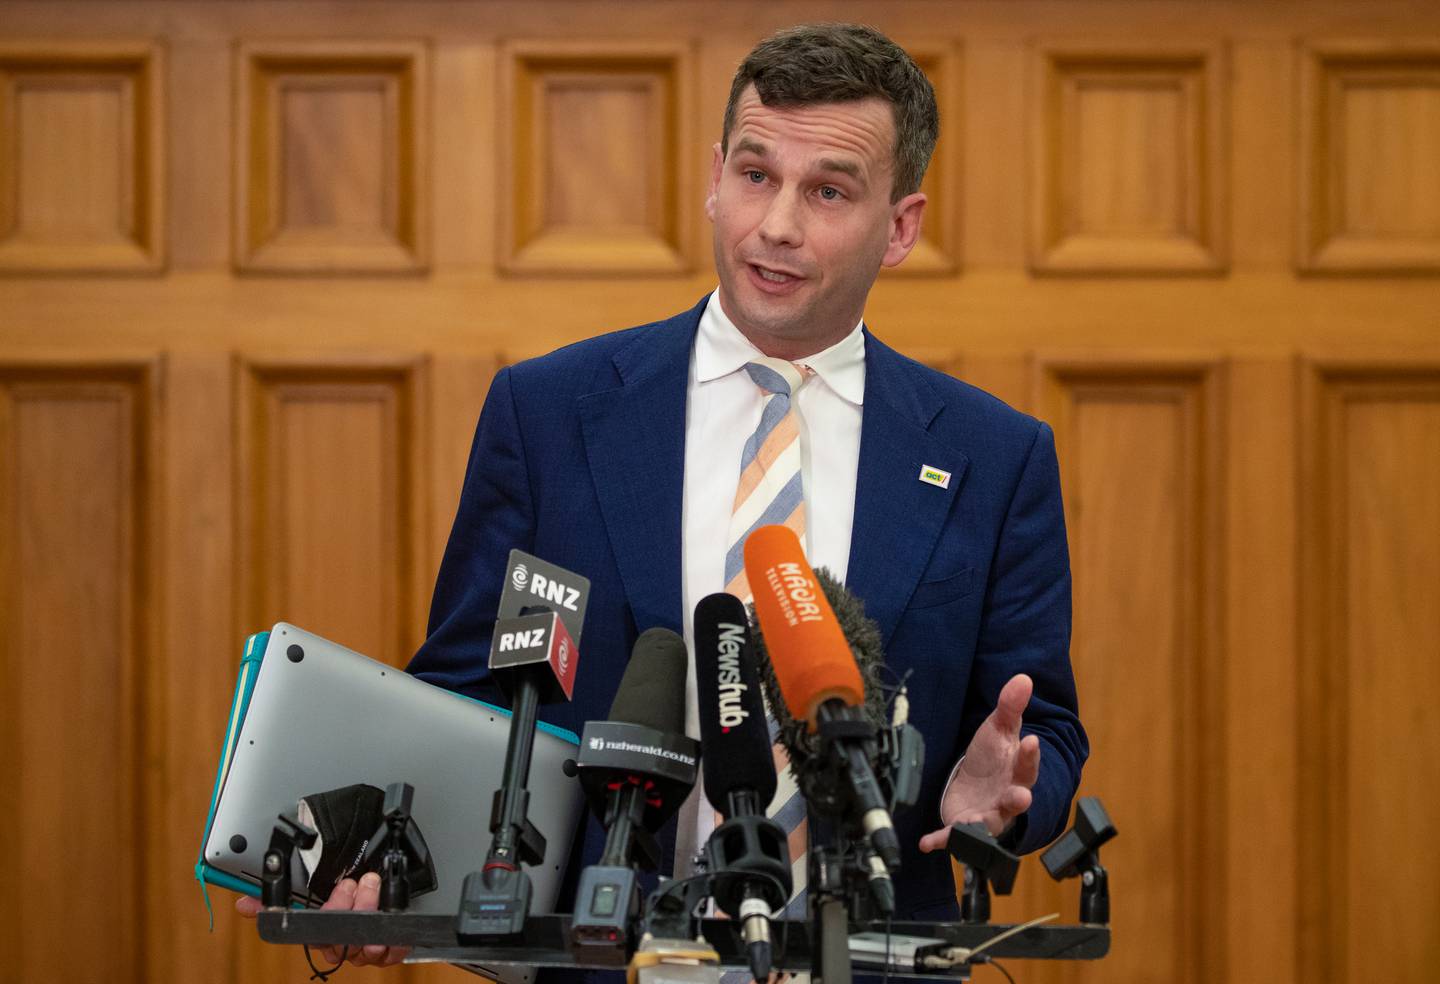 Act Party leader David Seymour said the fact it had taken seven days to identify close contacts showed contact tracing was a "costly charade". Photo / Mark Mitchell